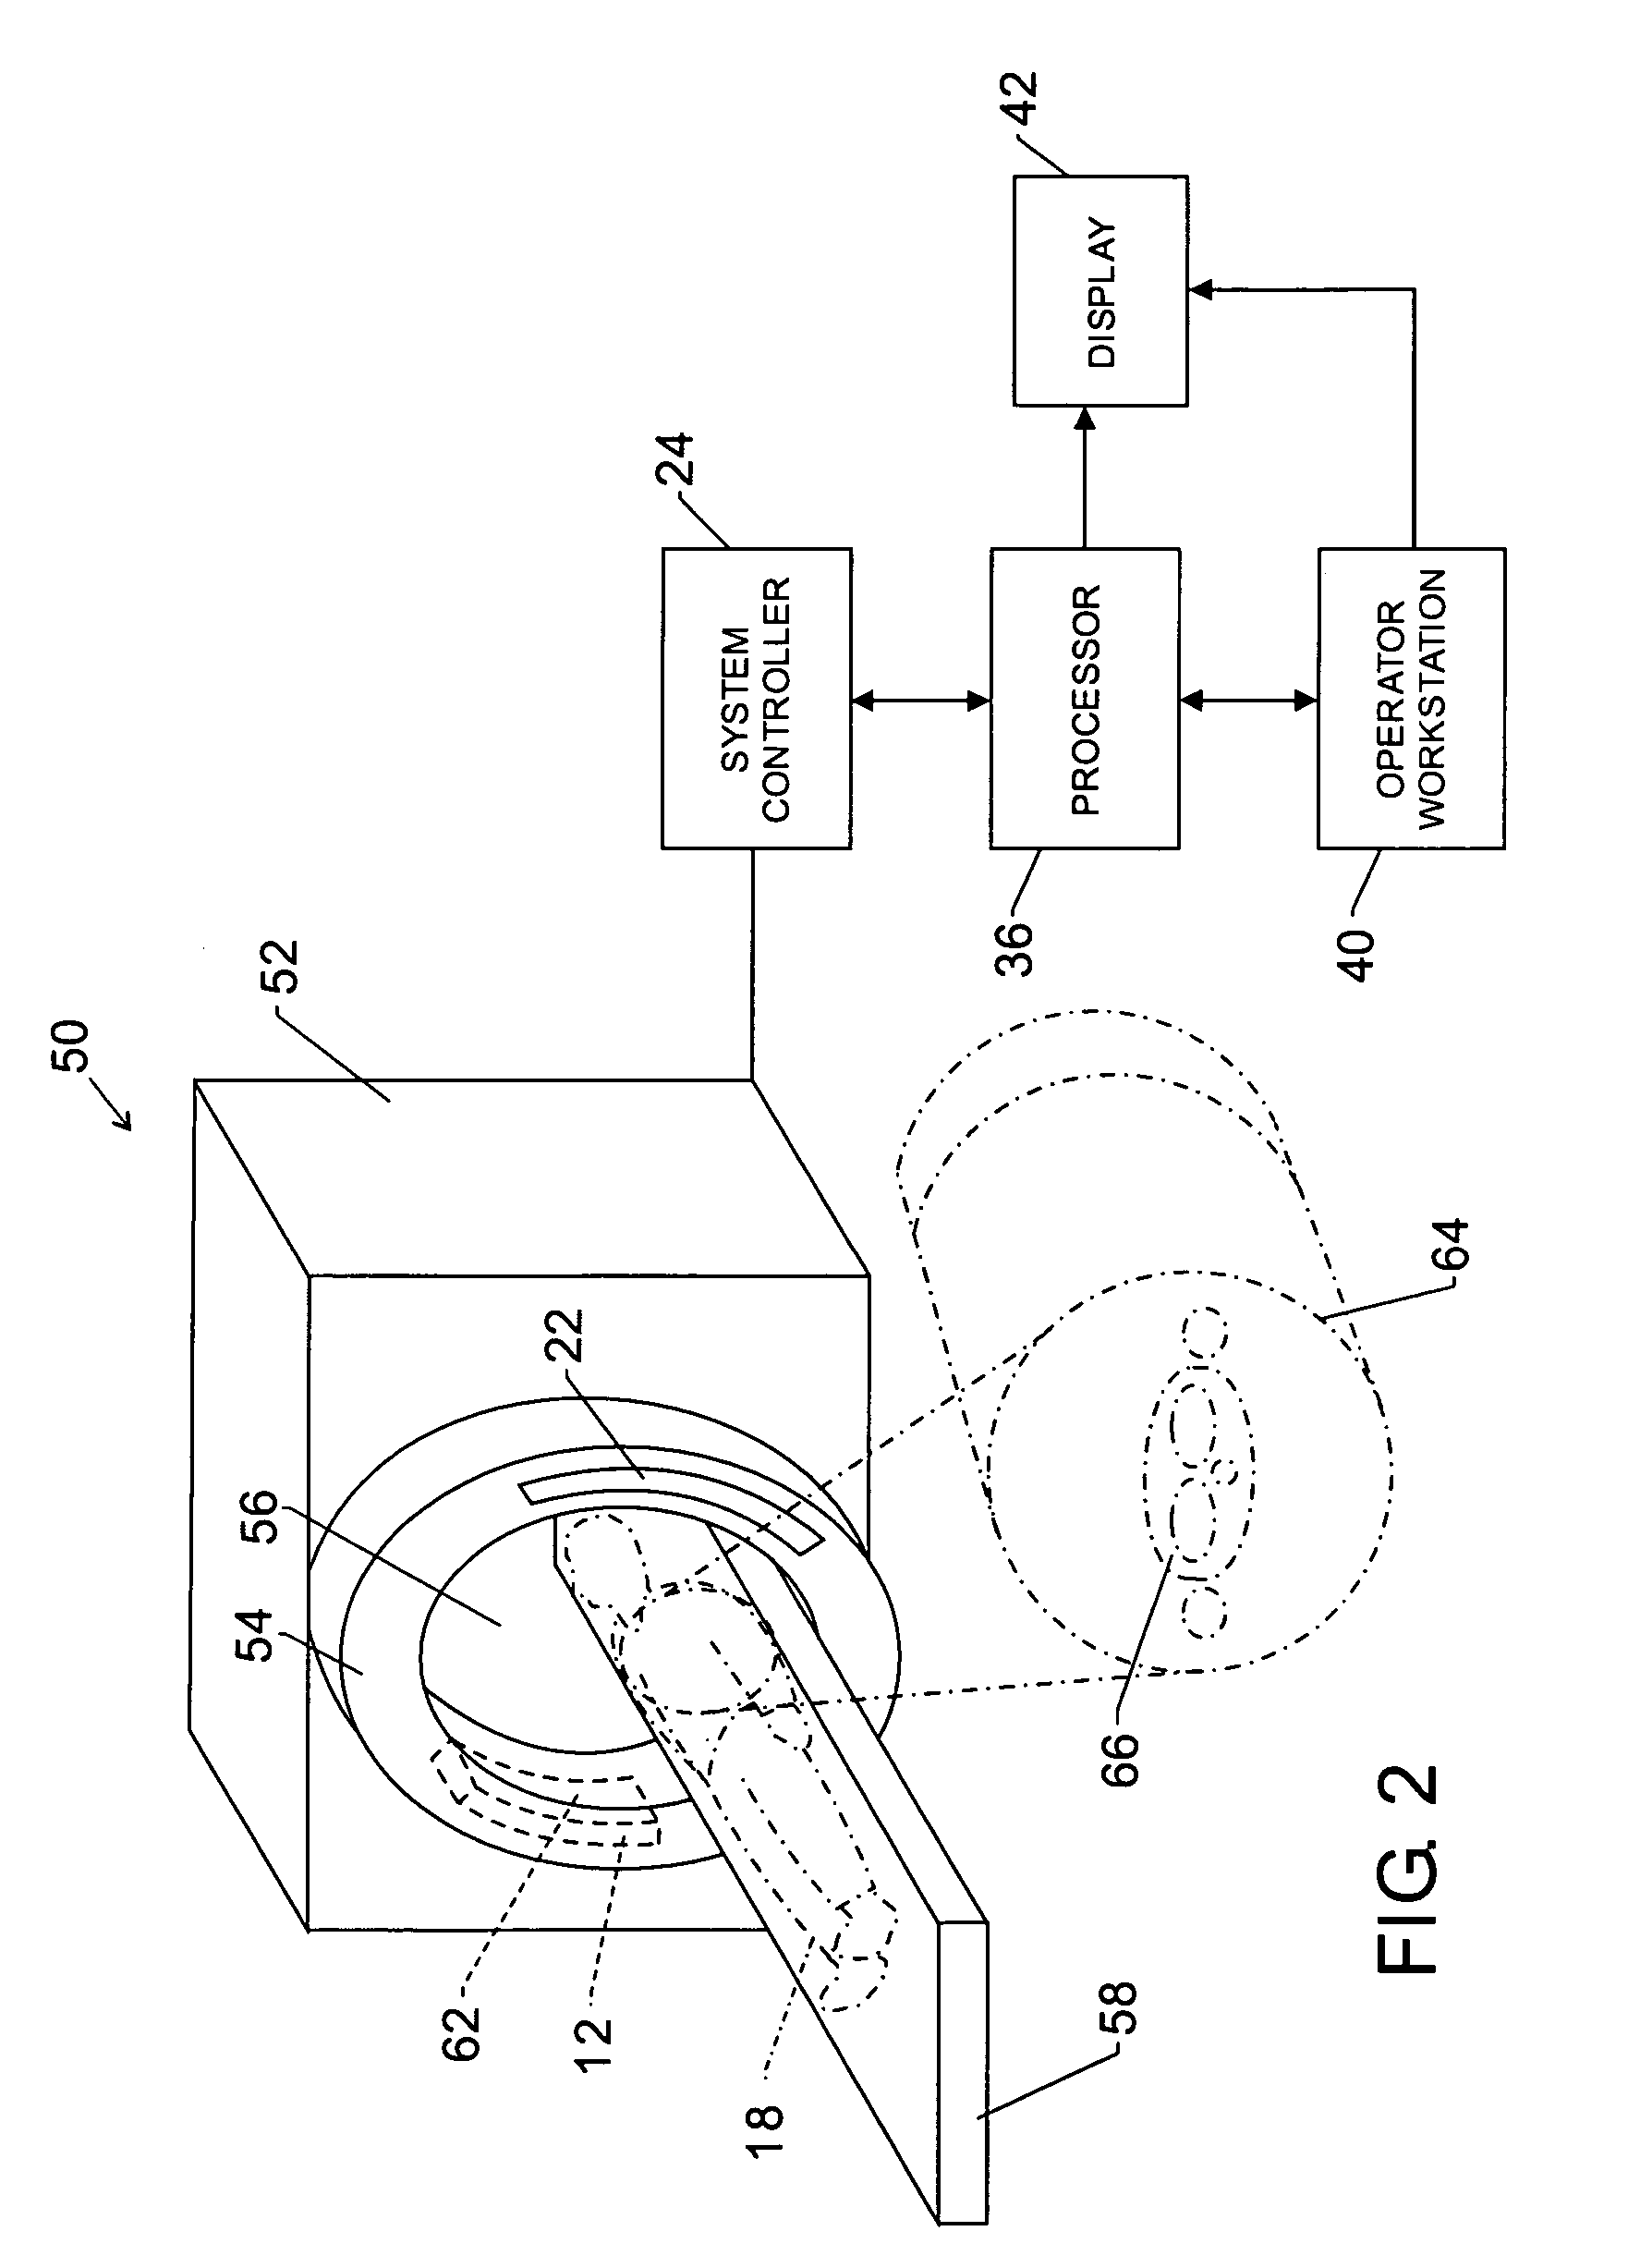 Method and apparatus for reduction of artifacts in computed tomography images